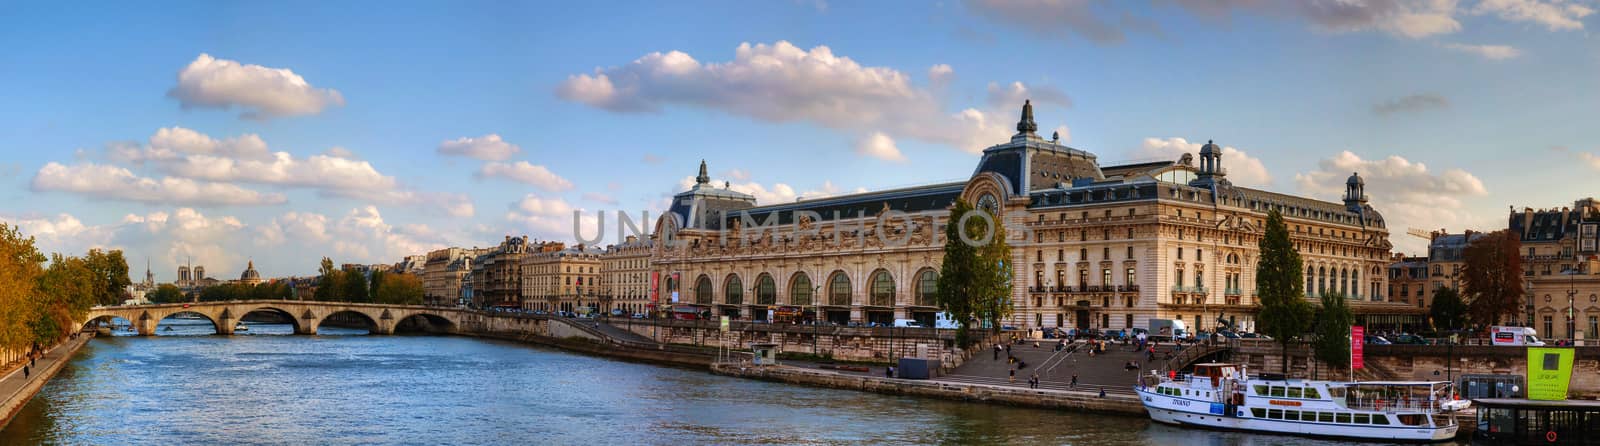 D'Orsay museum building in Paris, France by AndreyKr